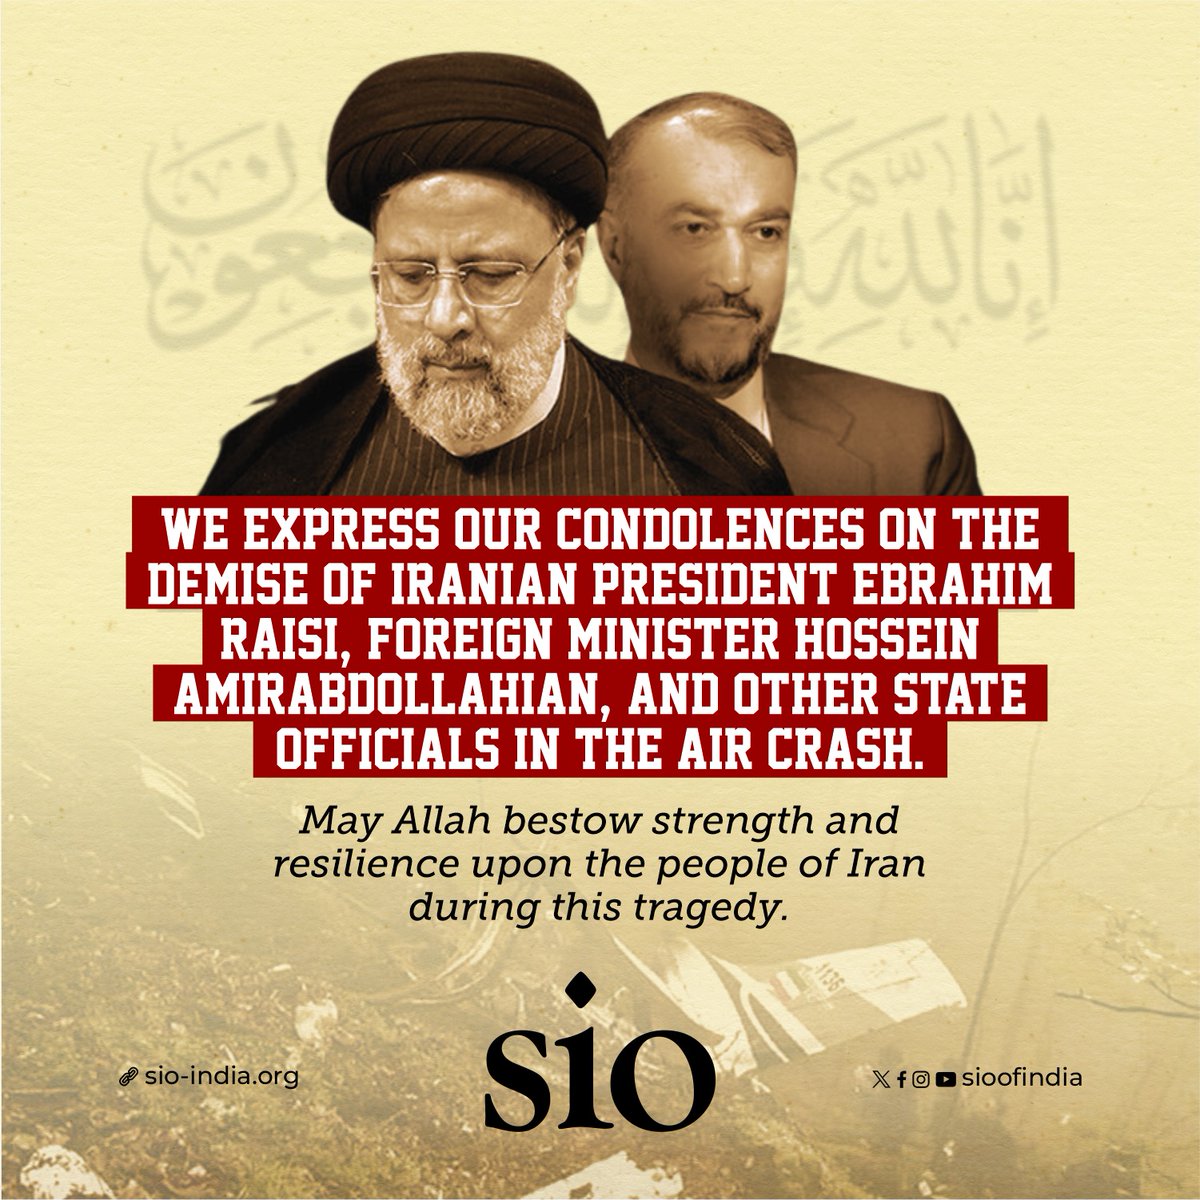 We express our condolences on the demise of Iranian President Ebrahim Raisi, Foreign Minister Hossein Amirabdollahian, and other state officials in the air crash.

May Allah bestow strength and resilience upon the people of Iran during this tragedy.

#Iran